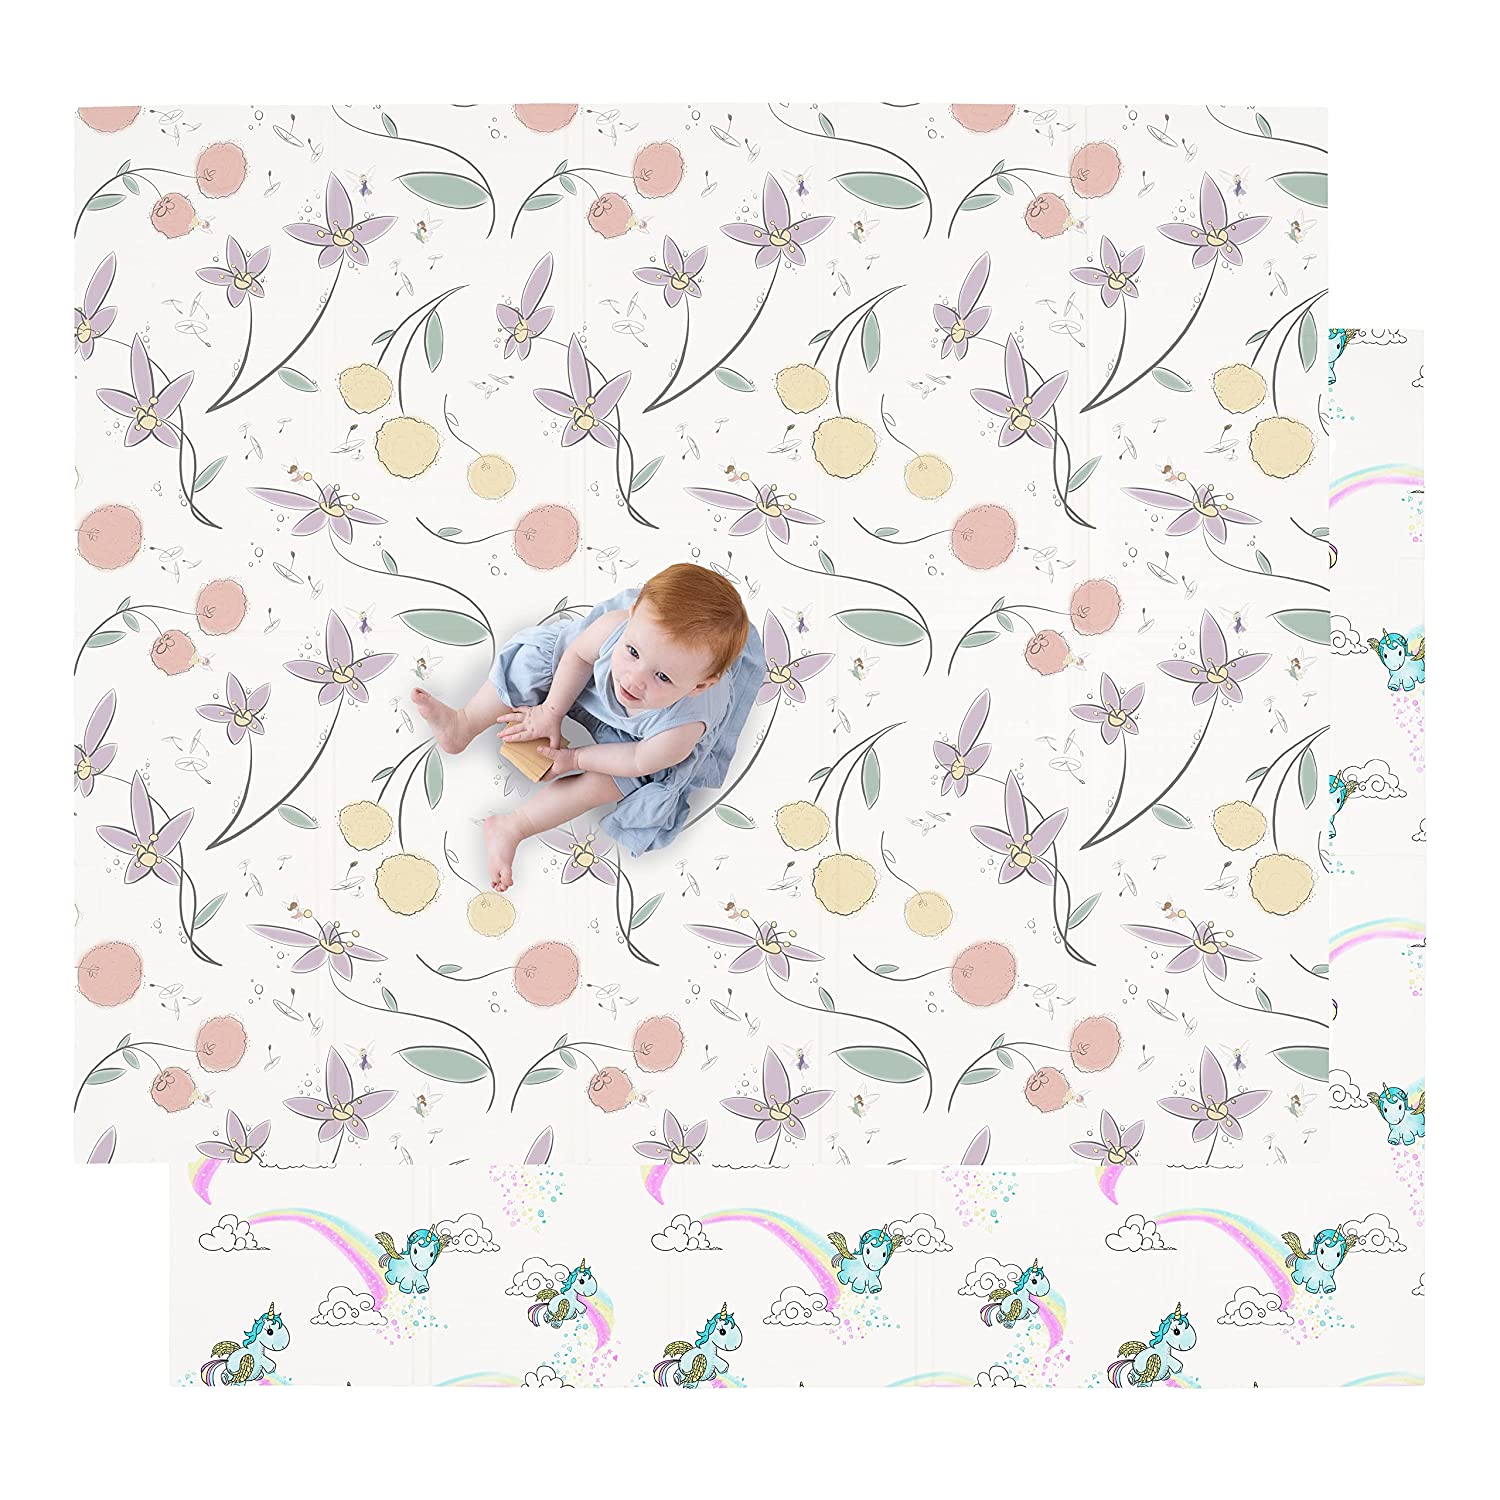 Babies' Floral Play Mats: Blossoming Fun for Little Ones